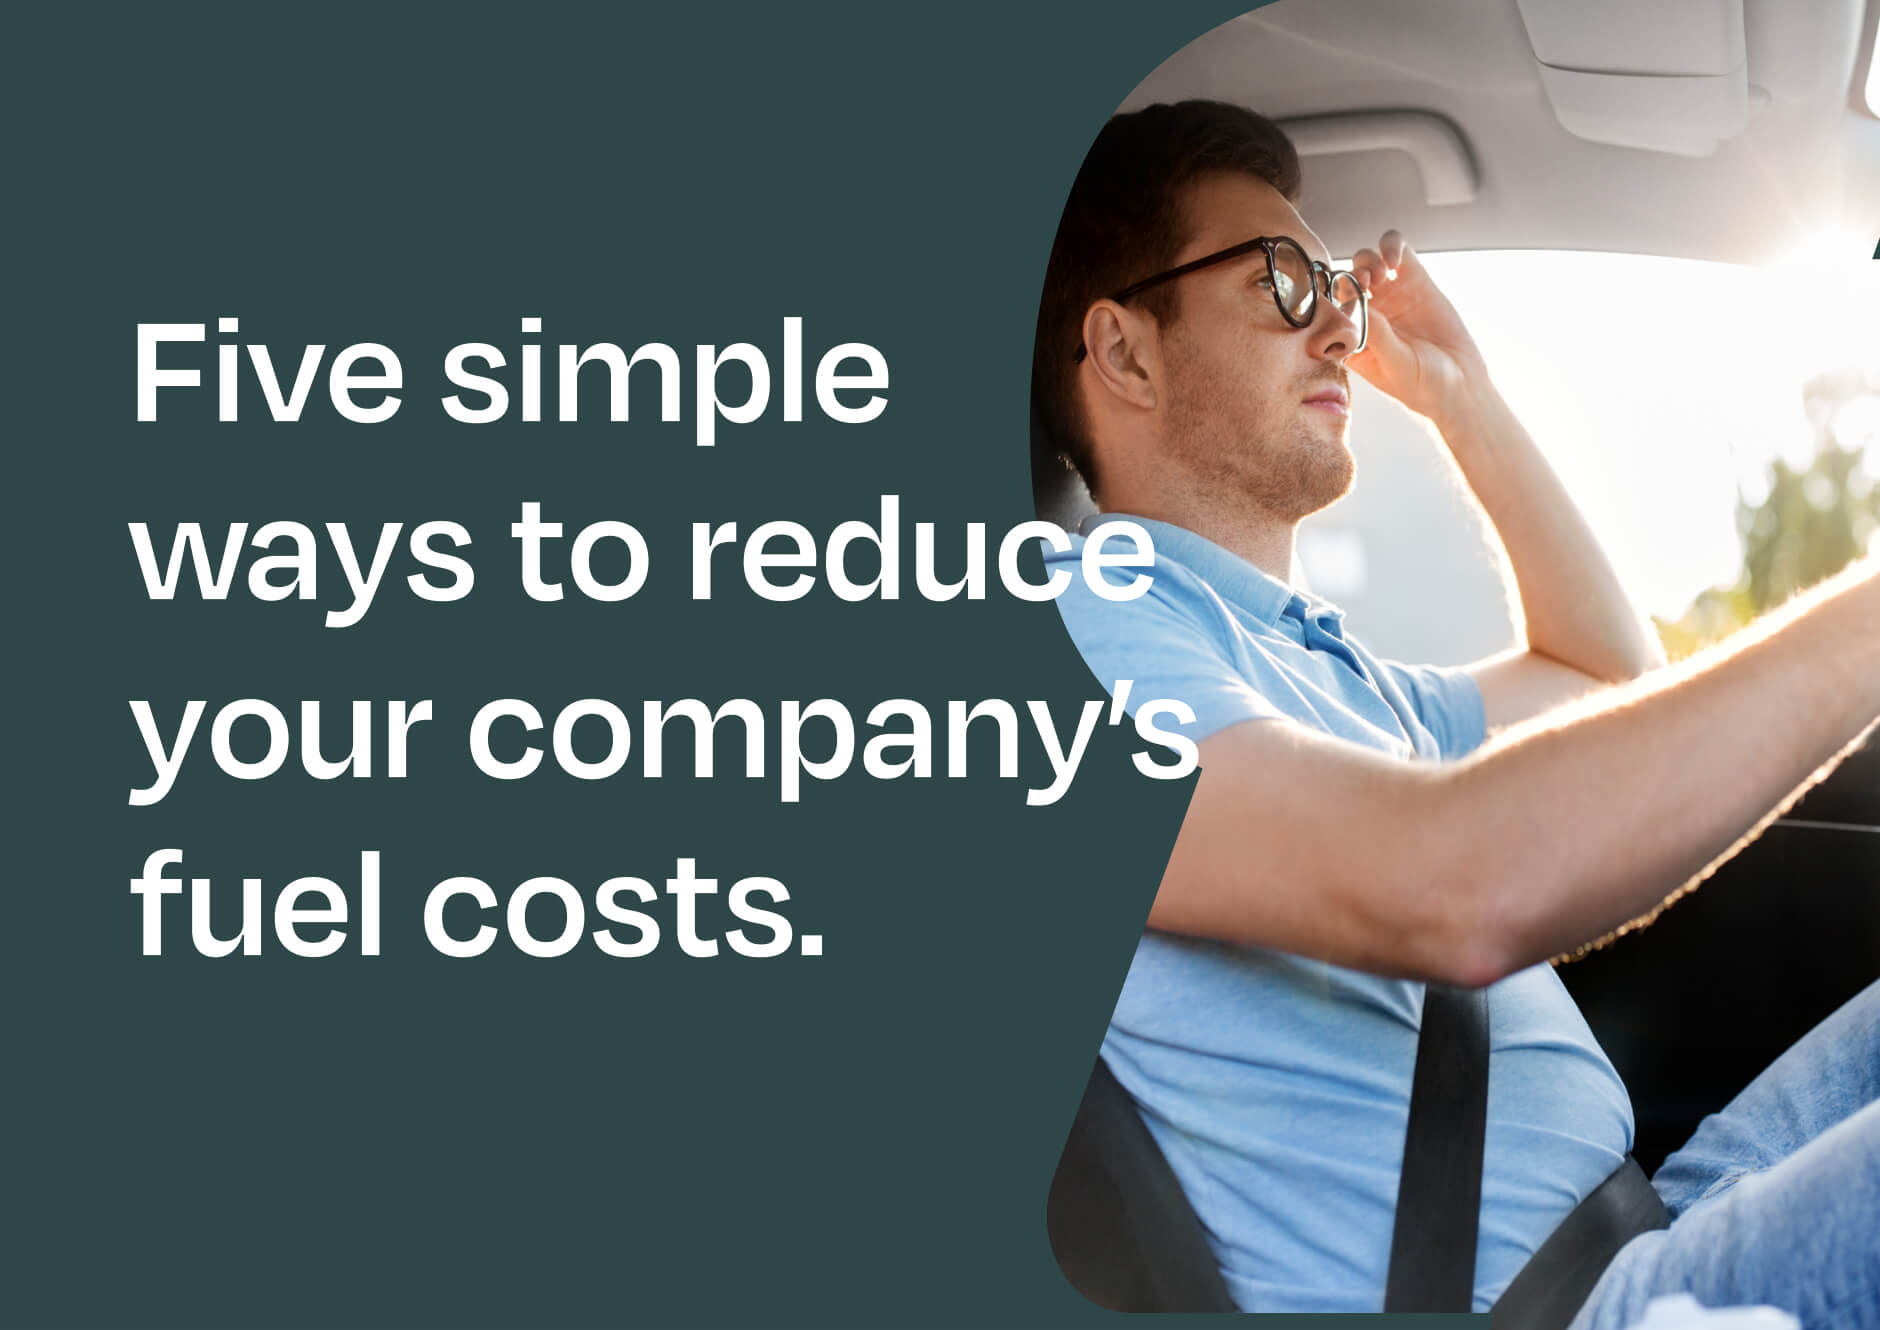 5 easy ways to reduce your company's fuel consumption.. Man driving car, looking concerned.